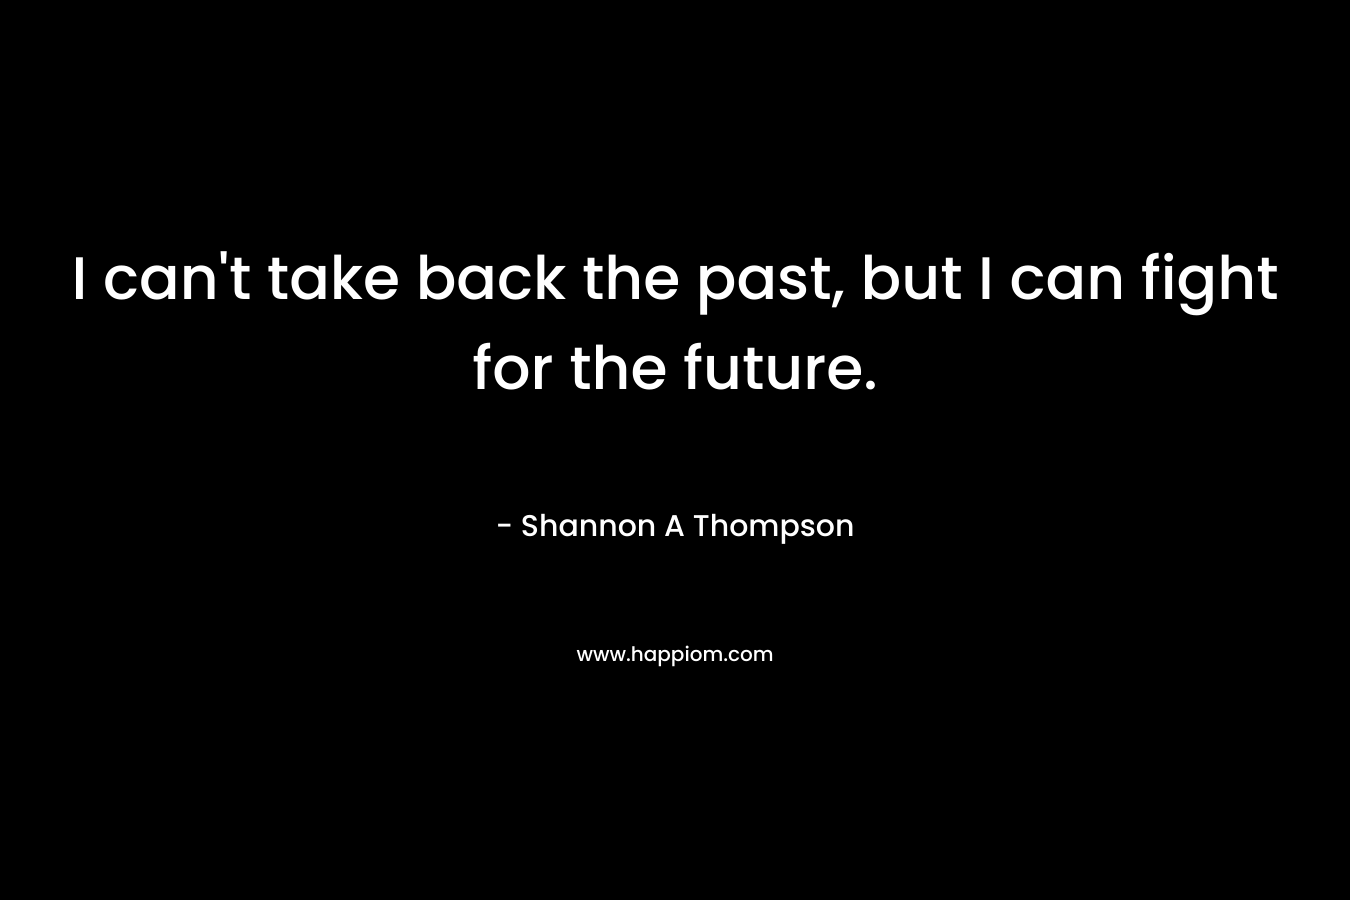 I can't take back the past, but I can fight for the future.